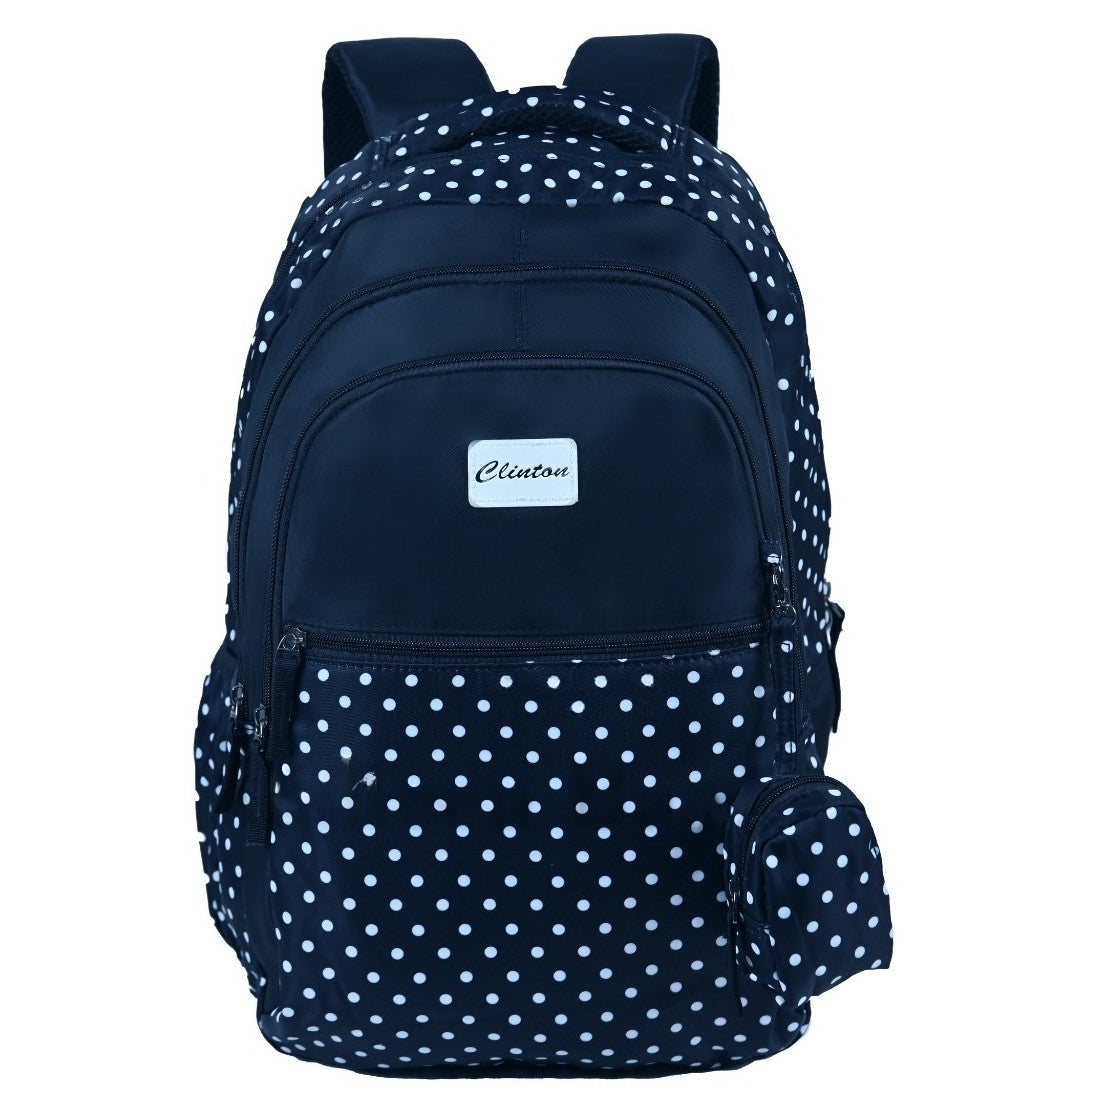 Buy 1 Get 1 Free | Large Capacity Multi Zipper Espiral Polka Dotted Backpack With Pencil Pouch Zaappy